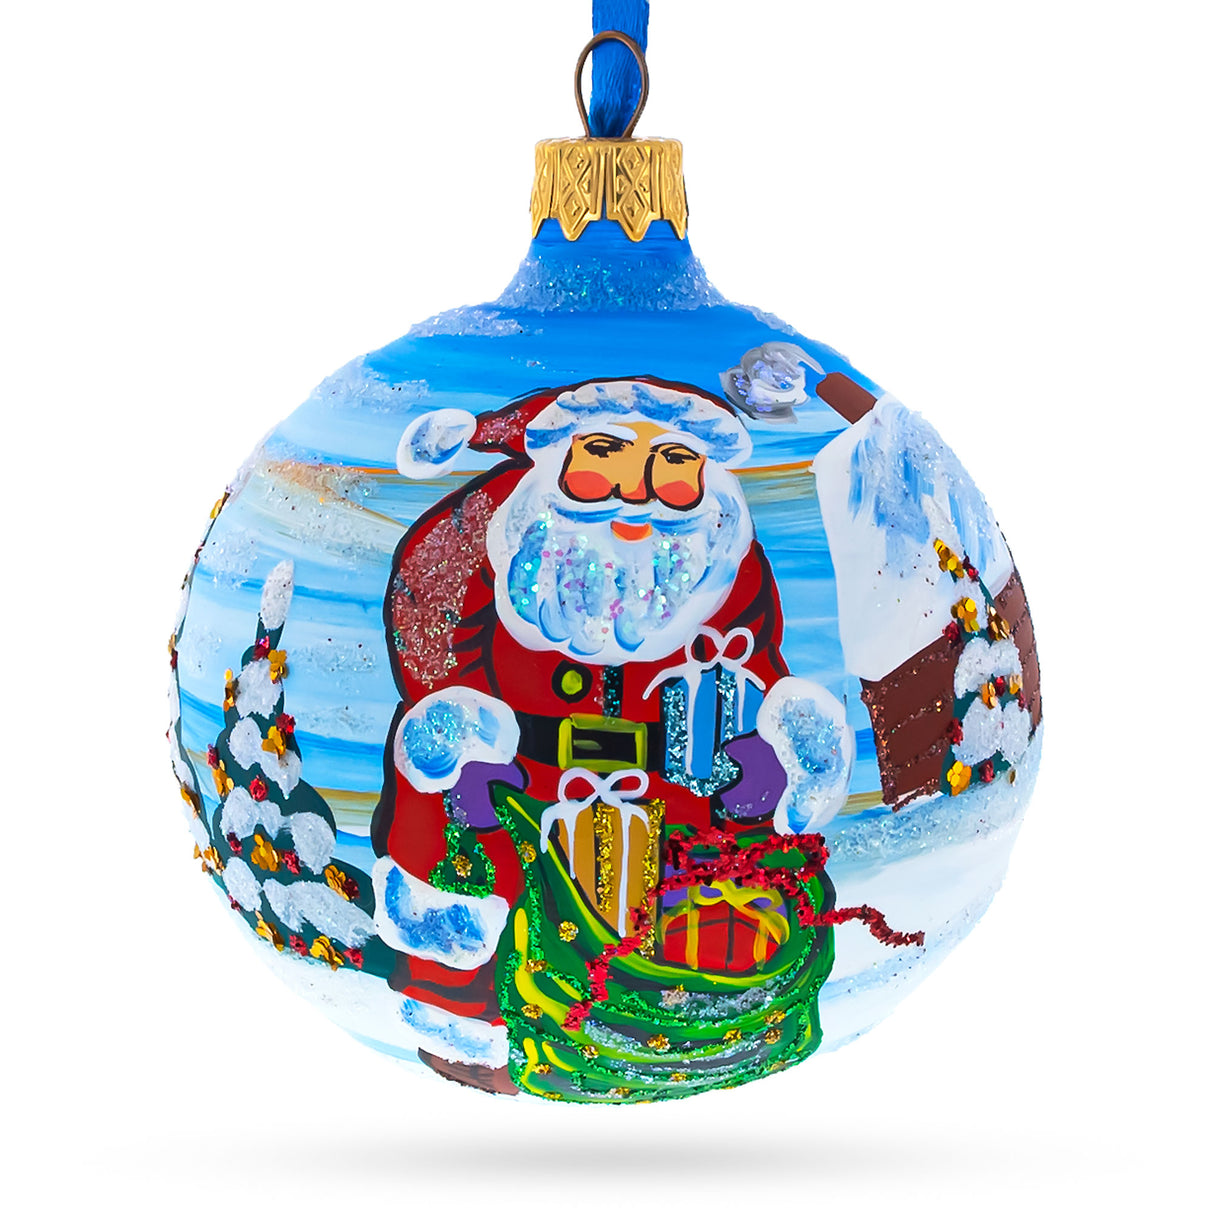 Glass Generous Santa: Santa with Bag of Gifts Blown Glass Ball Christmas Ornament 3.25 Inches in Multi color Round